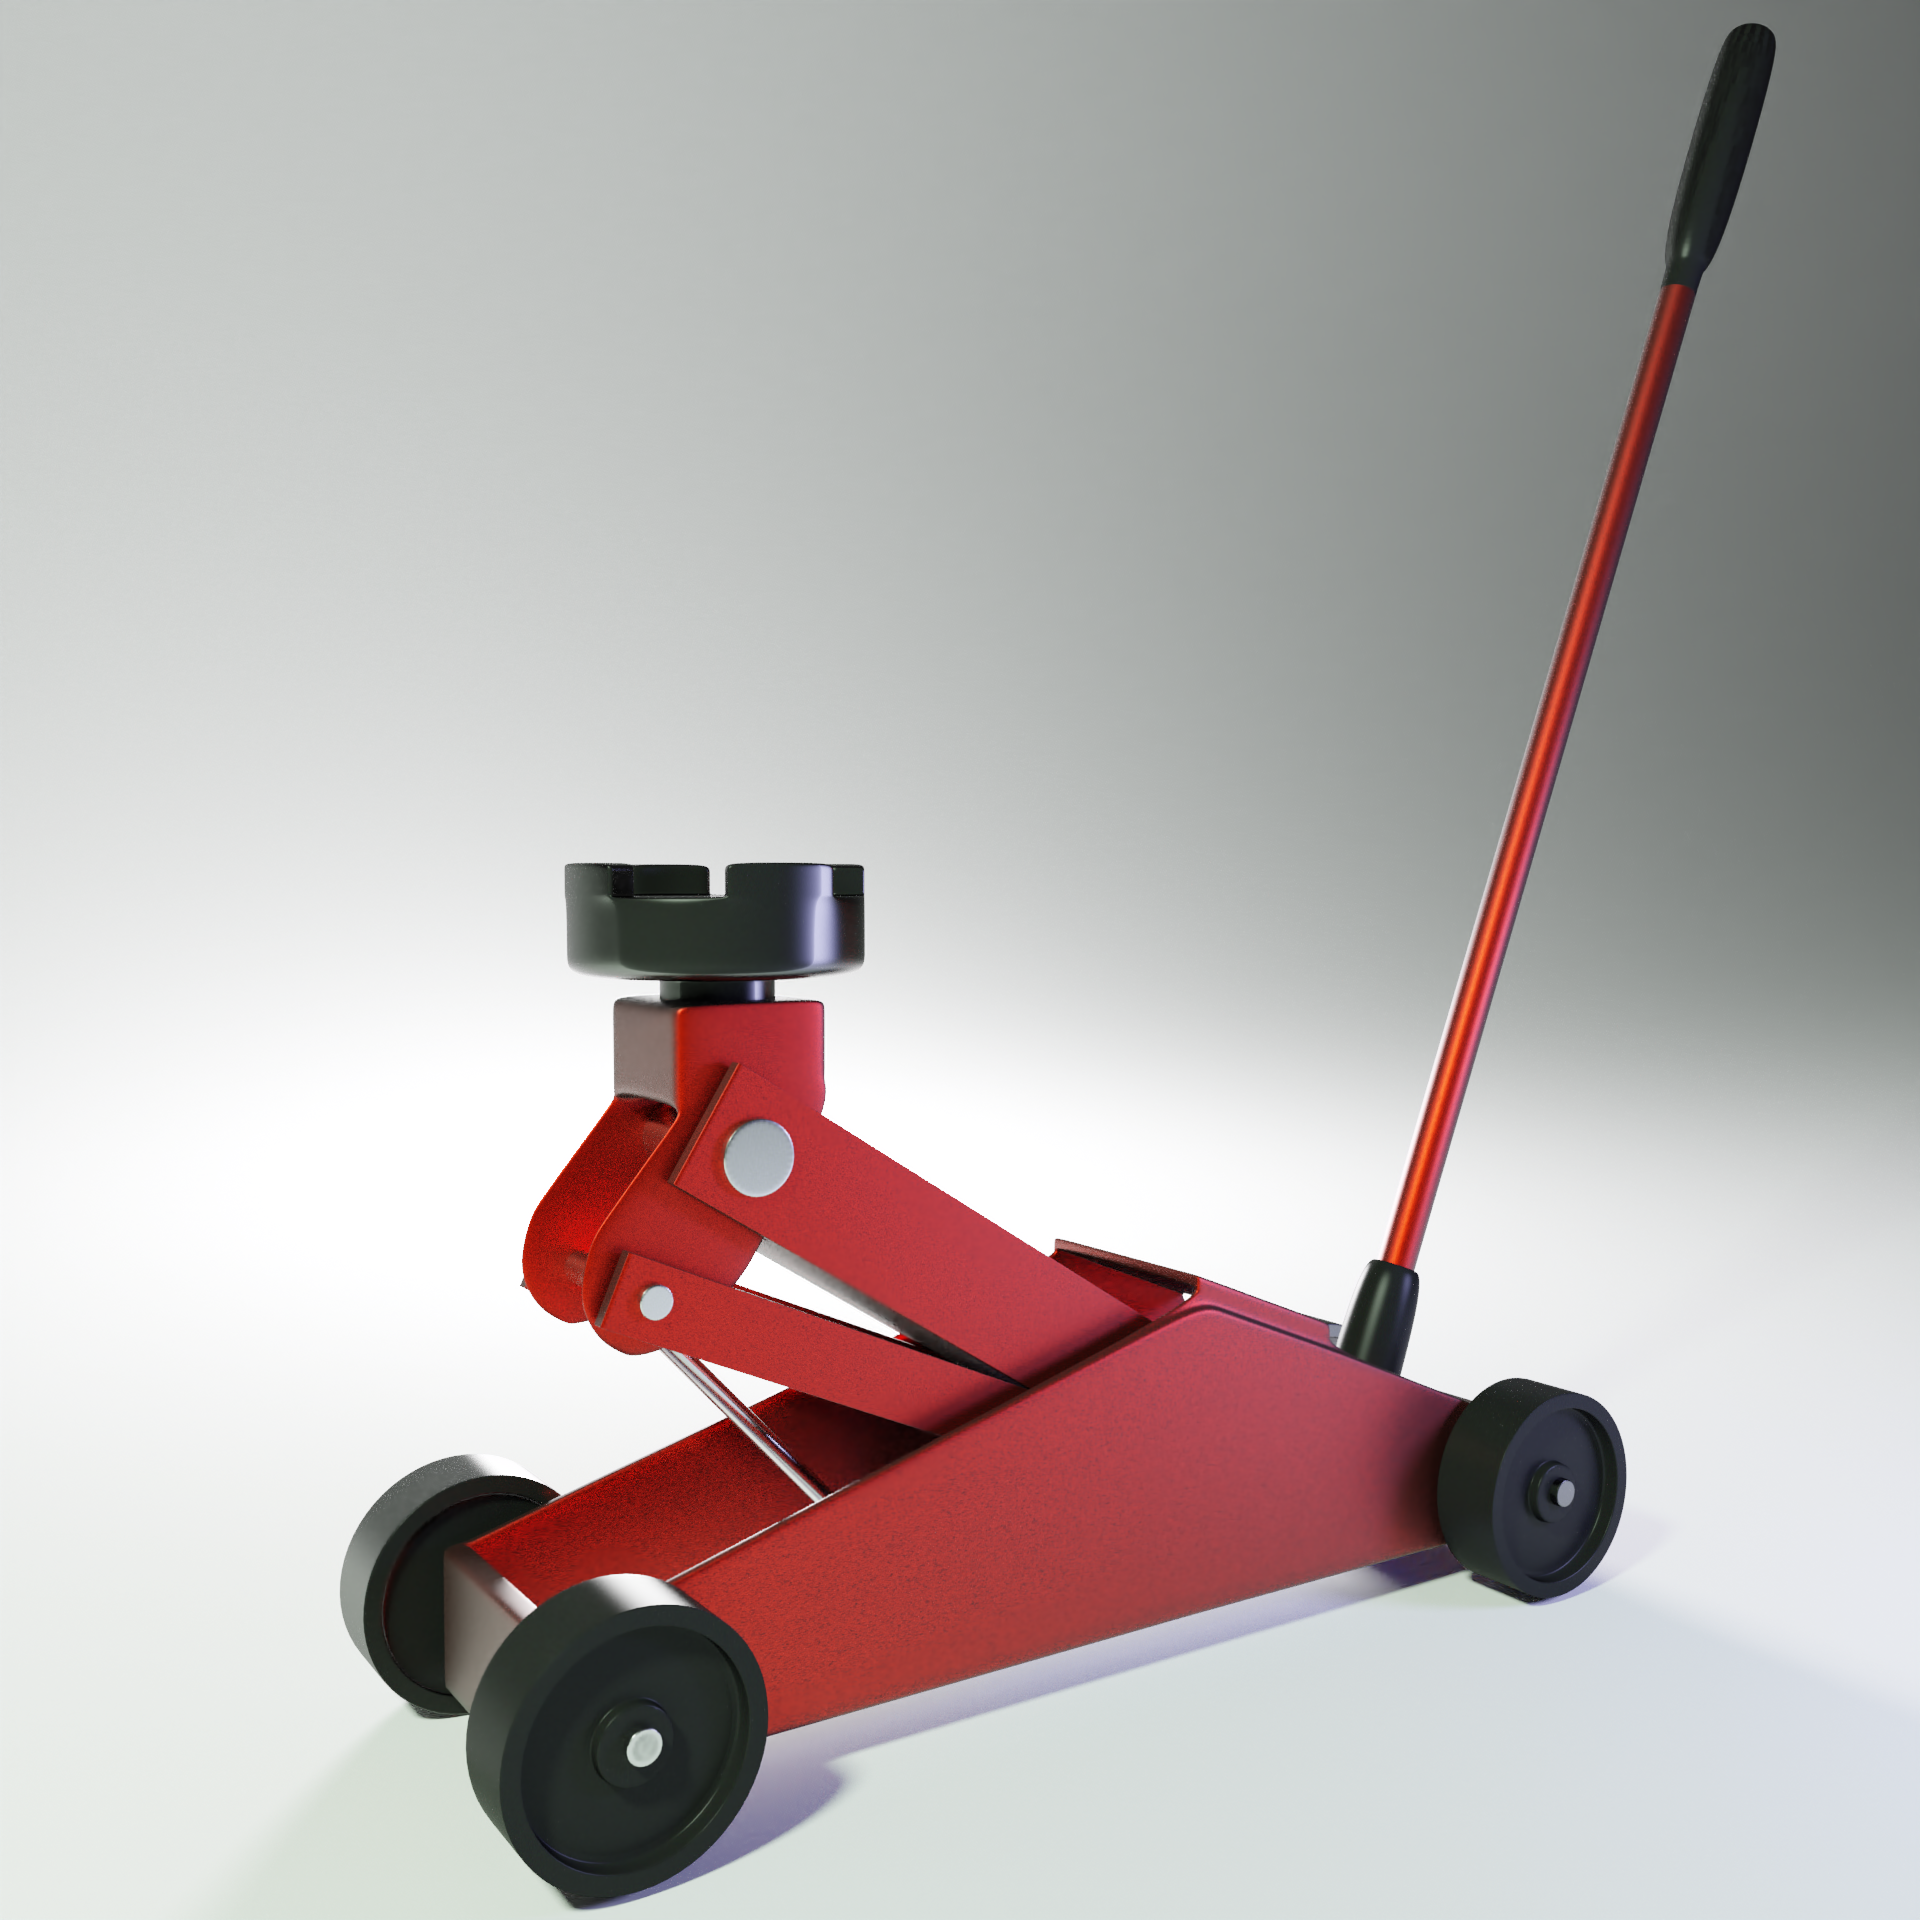 Hydraulic Jack preview image 1